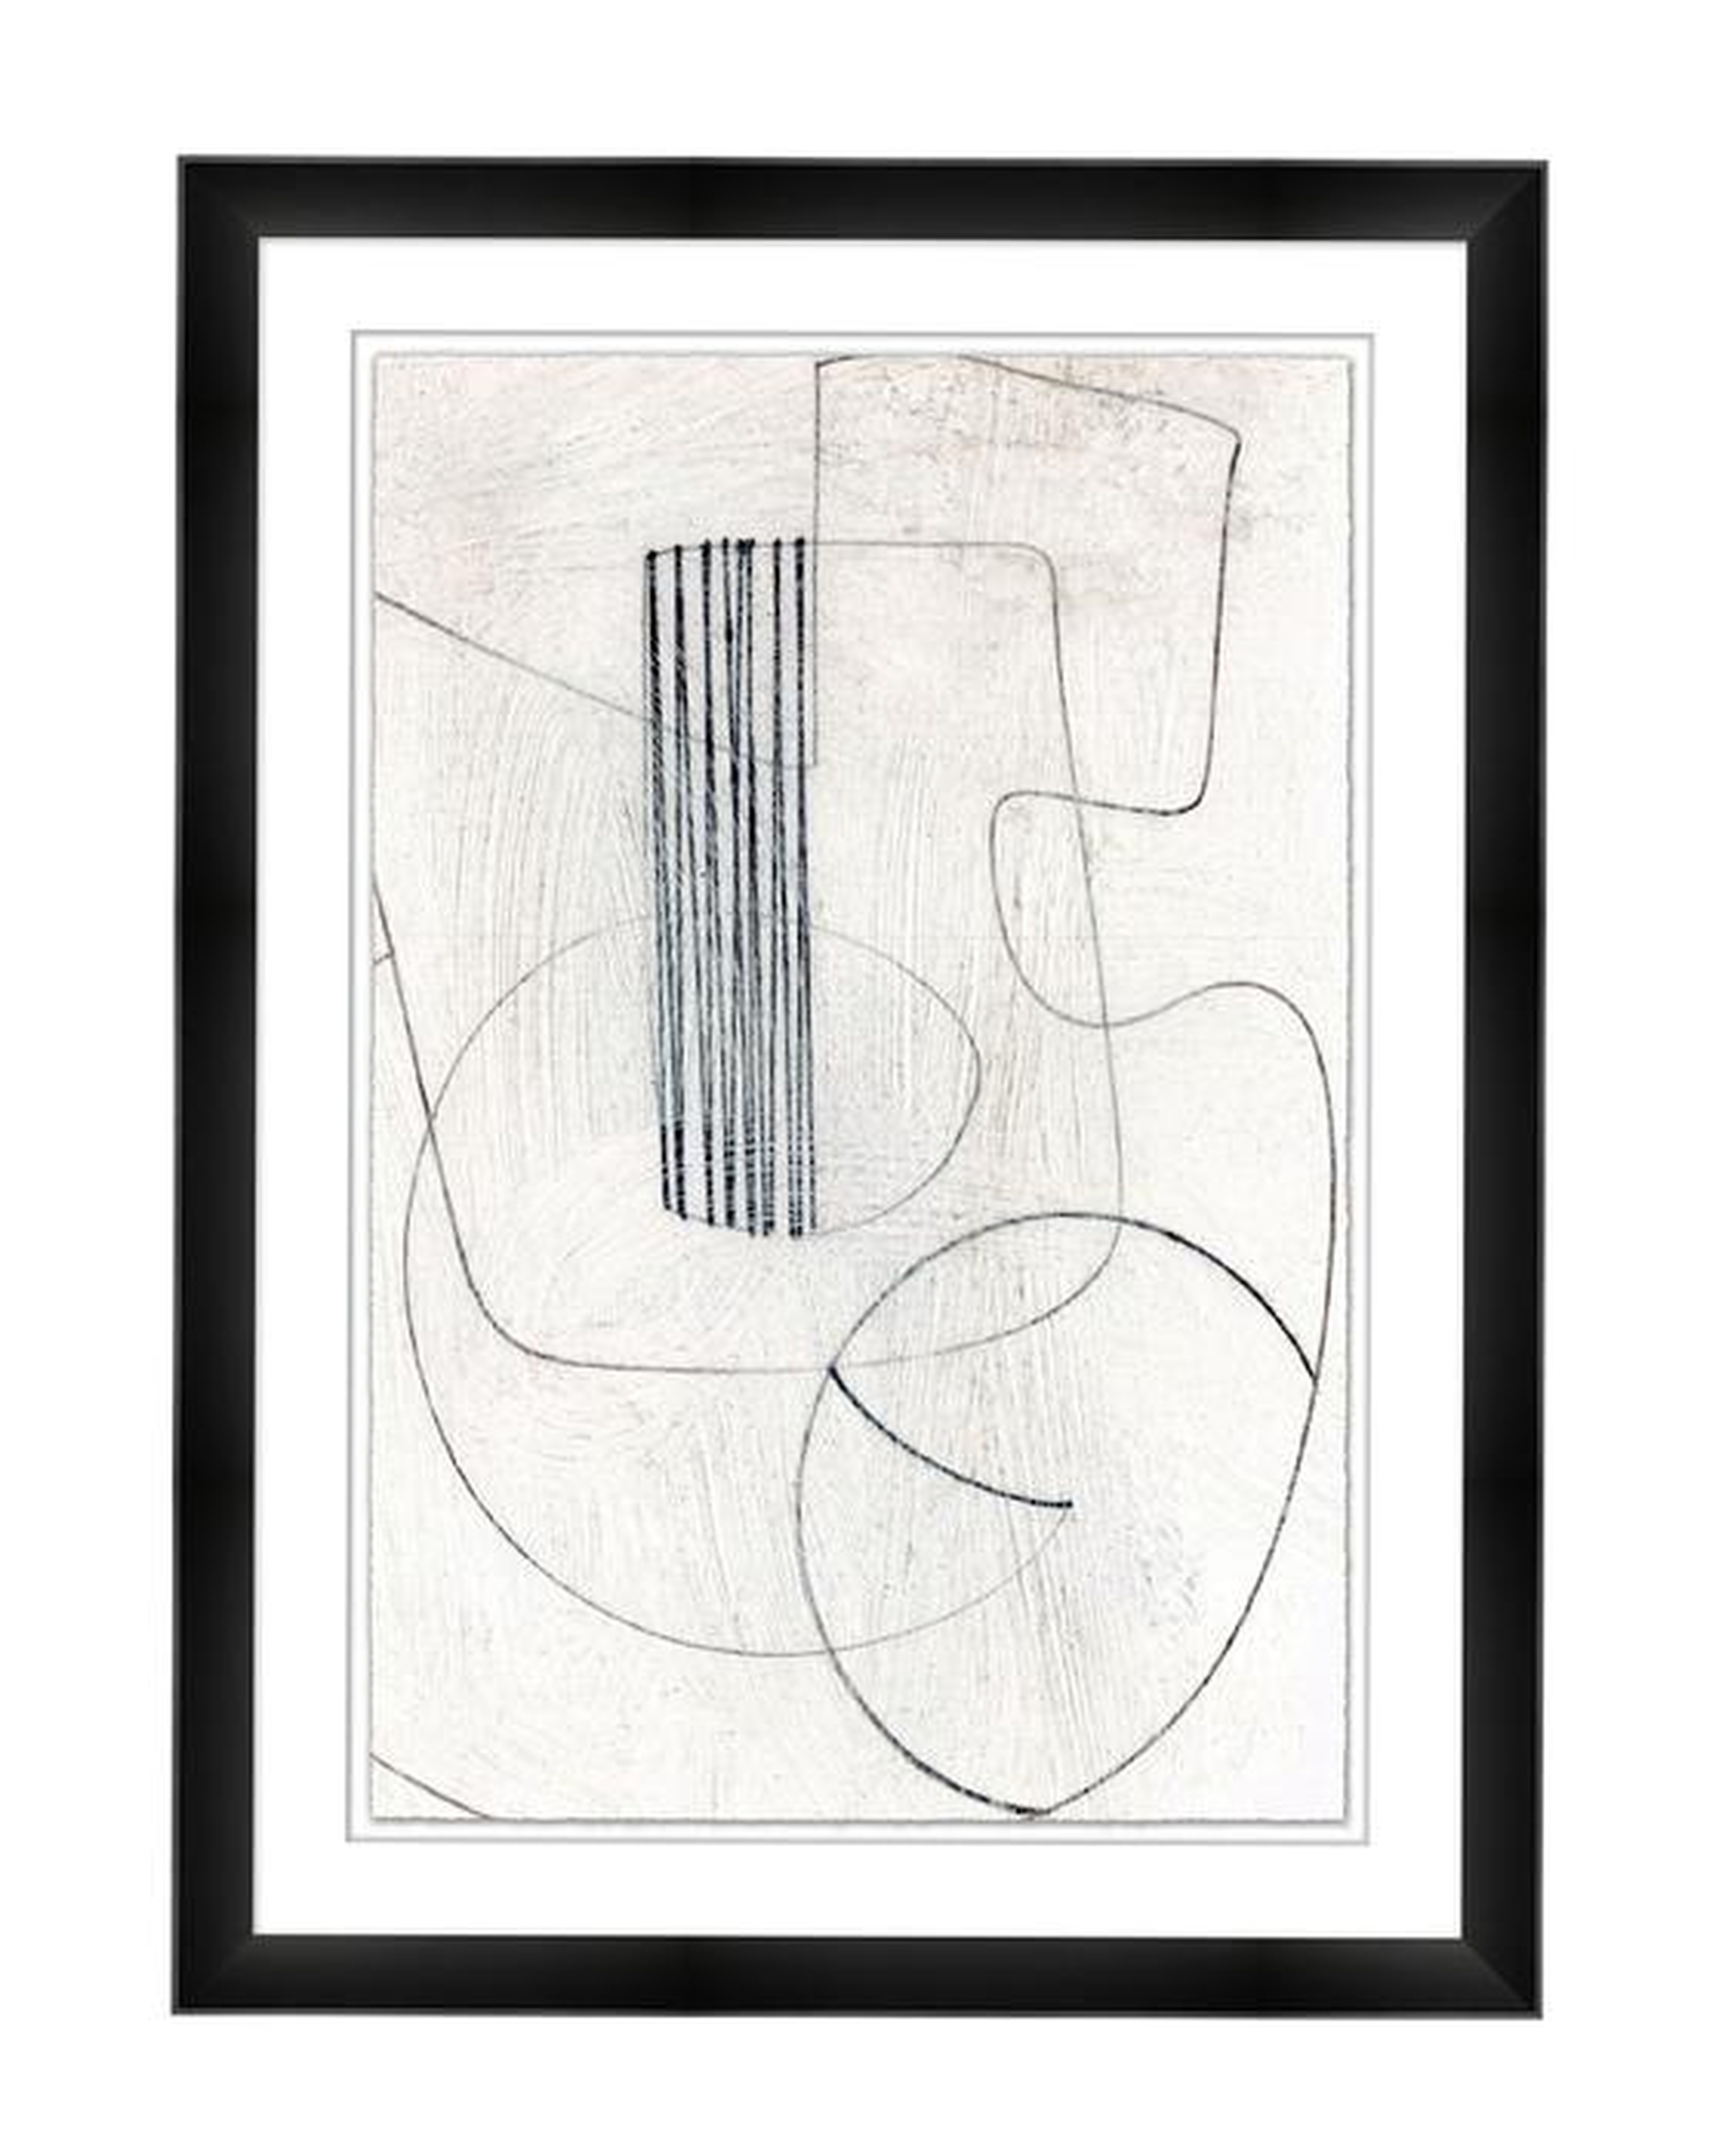 Intertwined, Framed Art - McGee & Co.